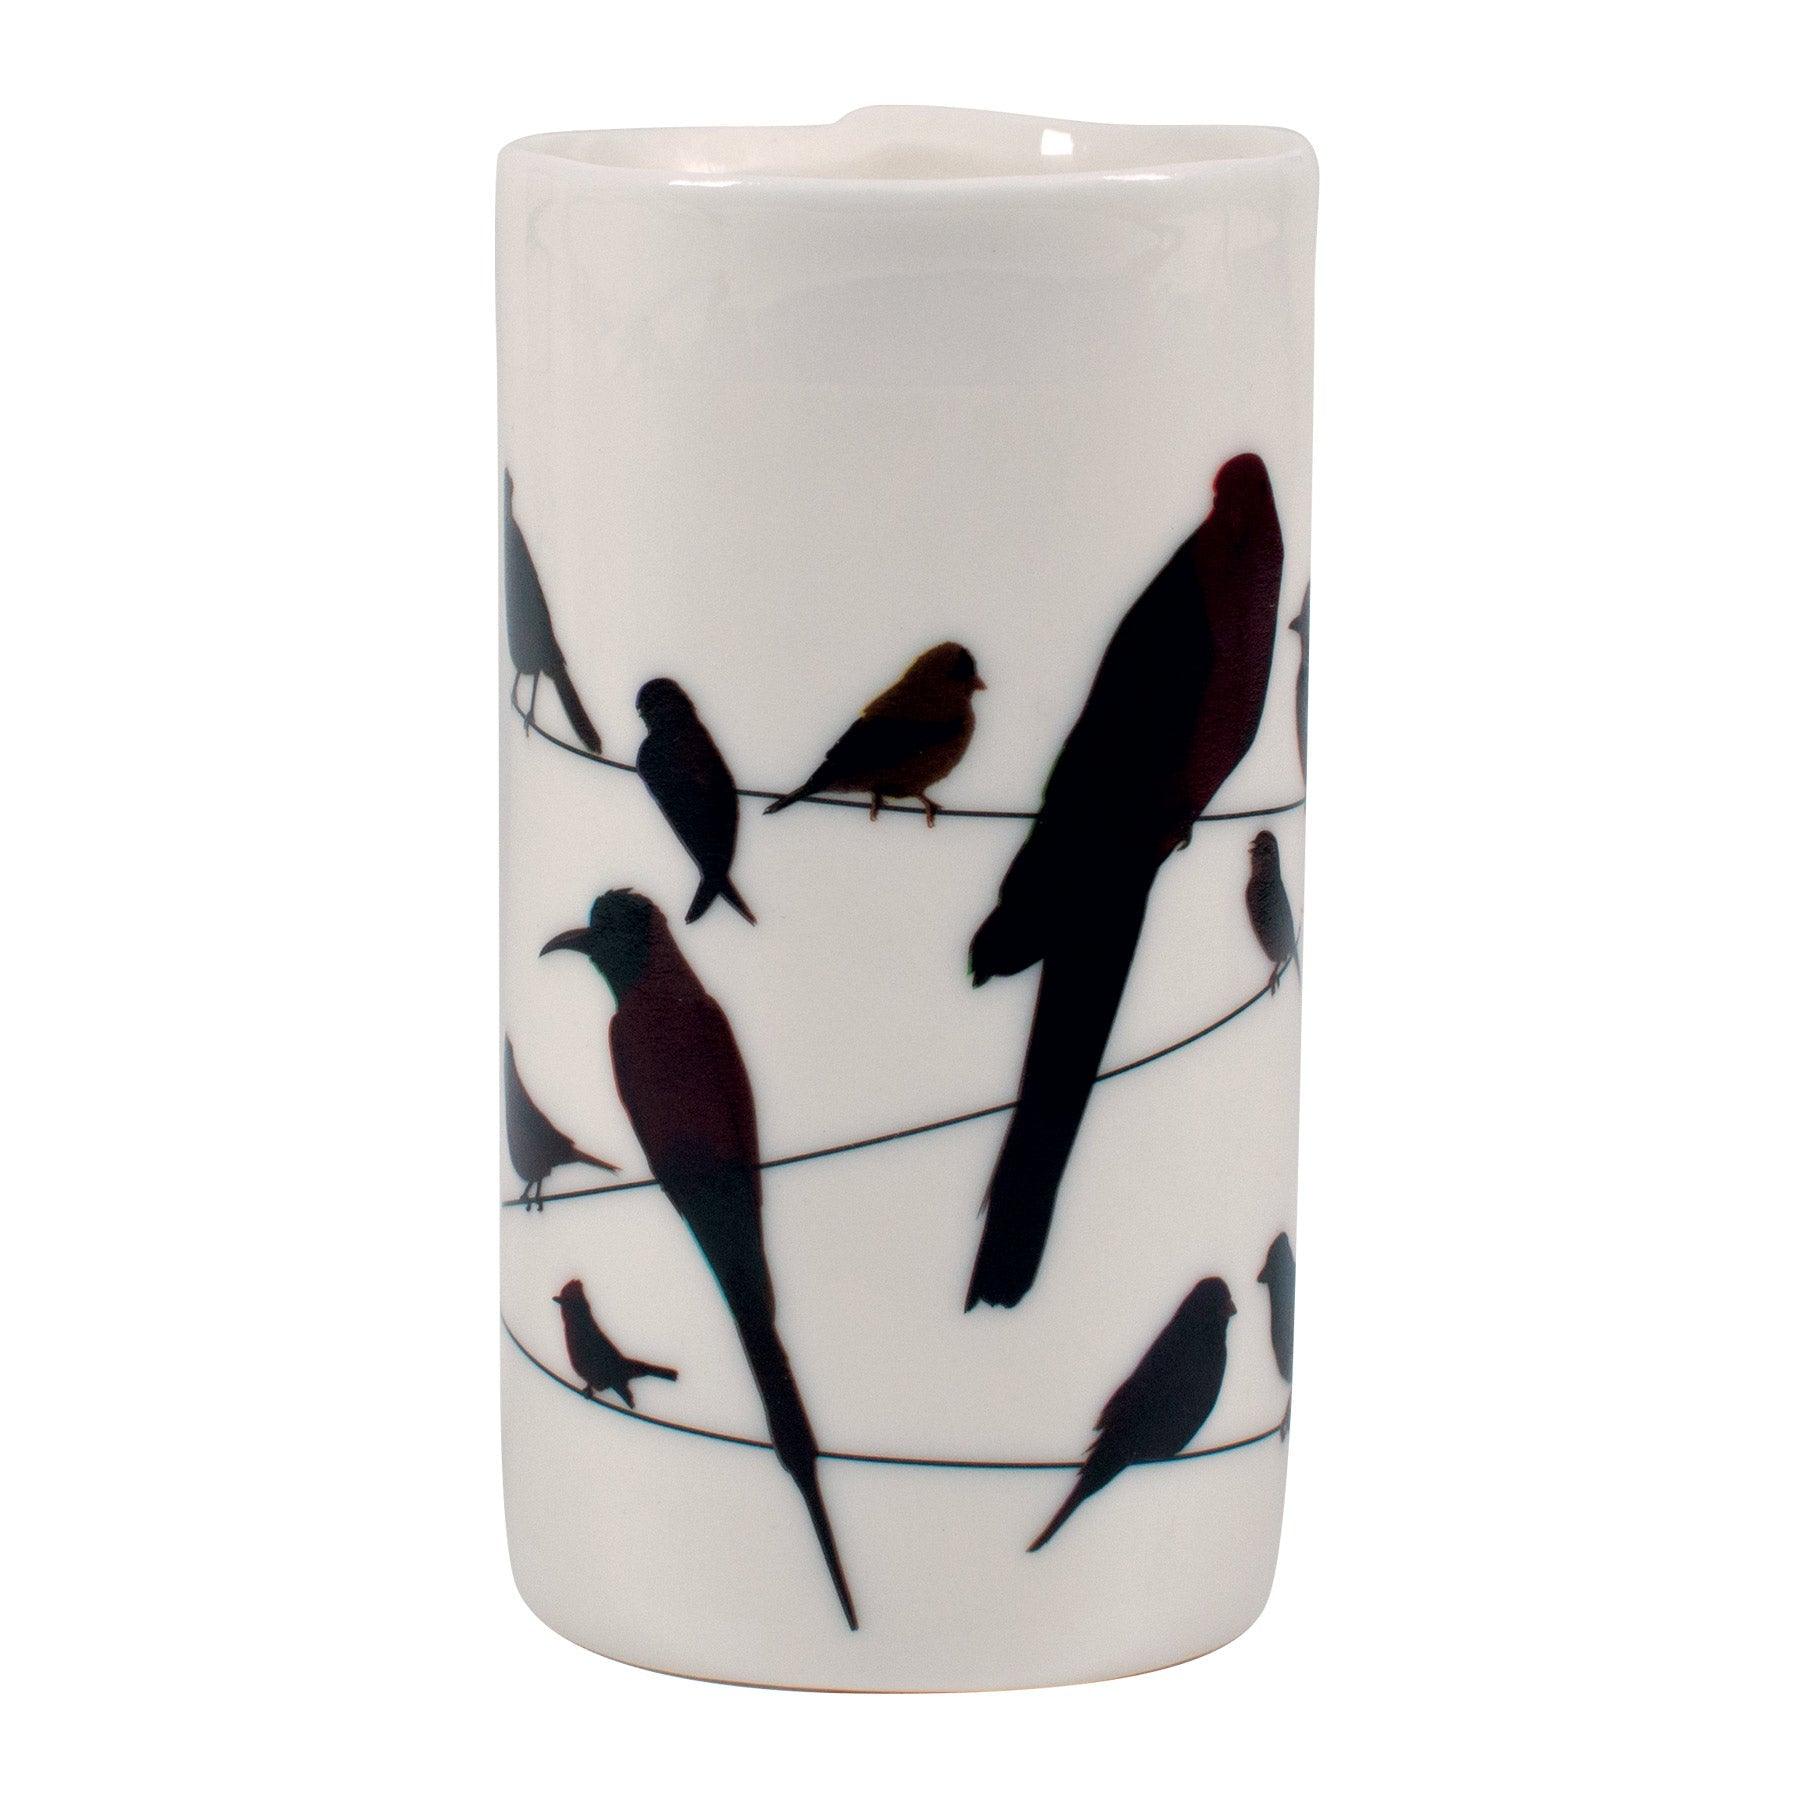 Product photo of Birds on a Wire Transforming Tealight Holder, a novelty gift manufactured by The Unemployed Philosophers Guild.